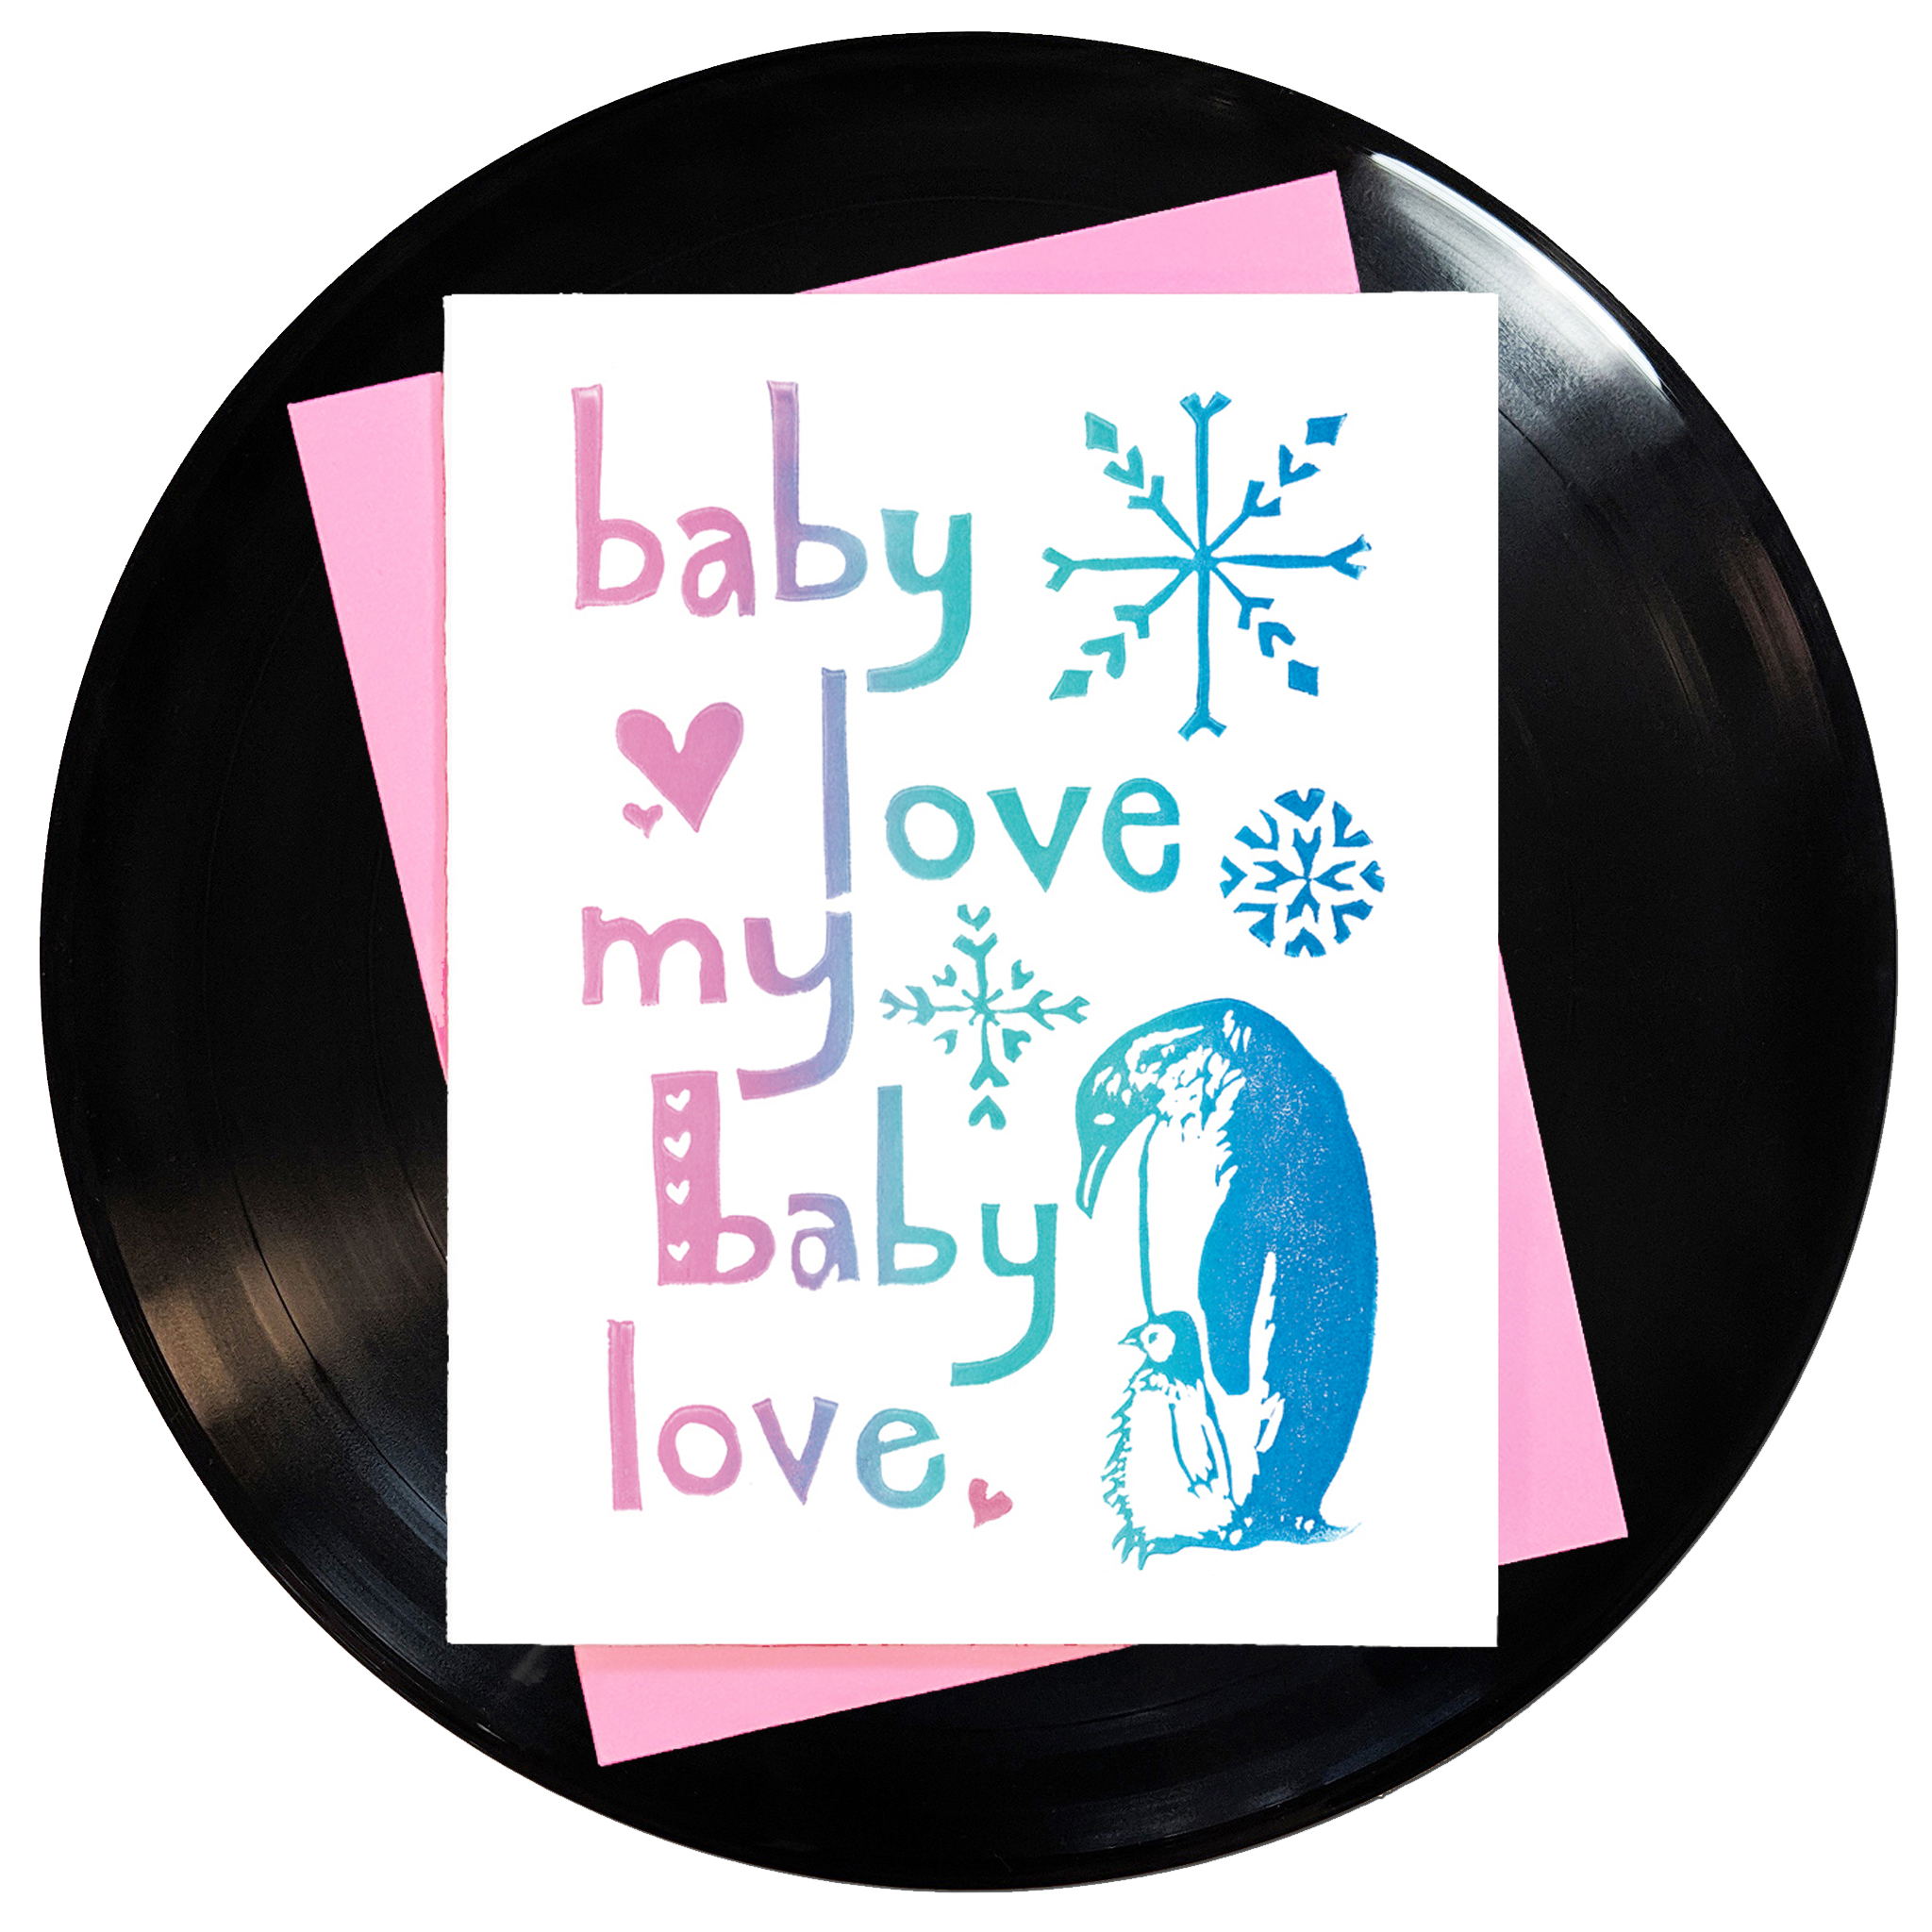 Baby Love My Baby Love Greeting Card 6 Pack Inspired By Music Foreignspell